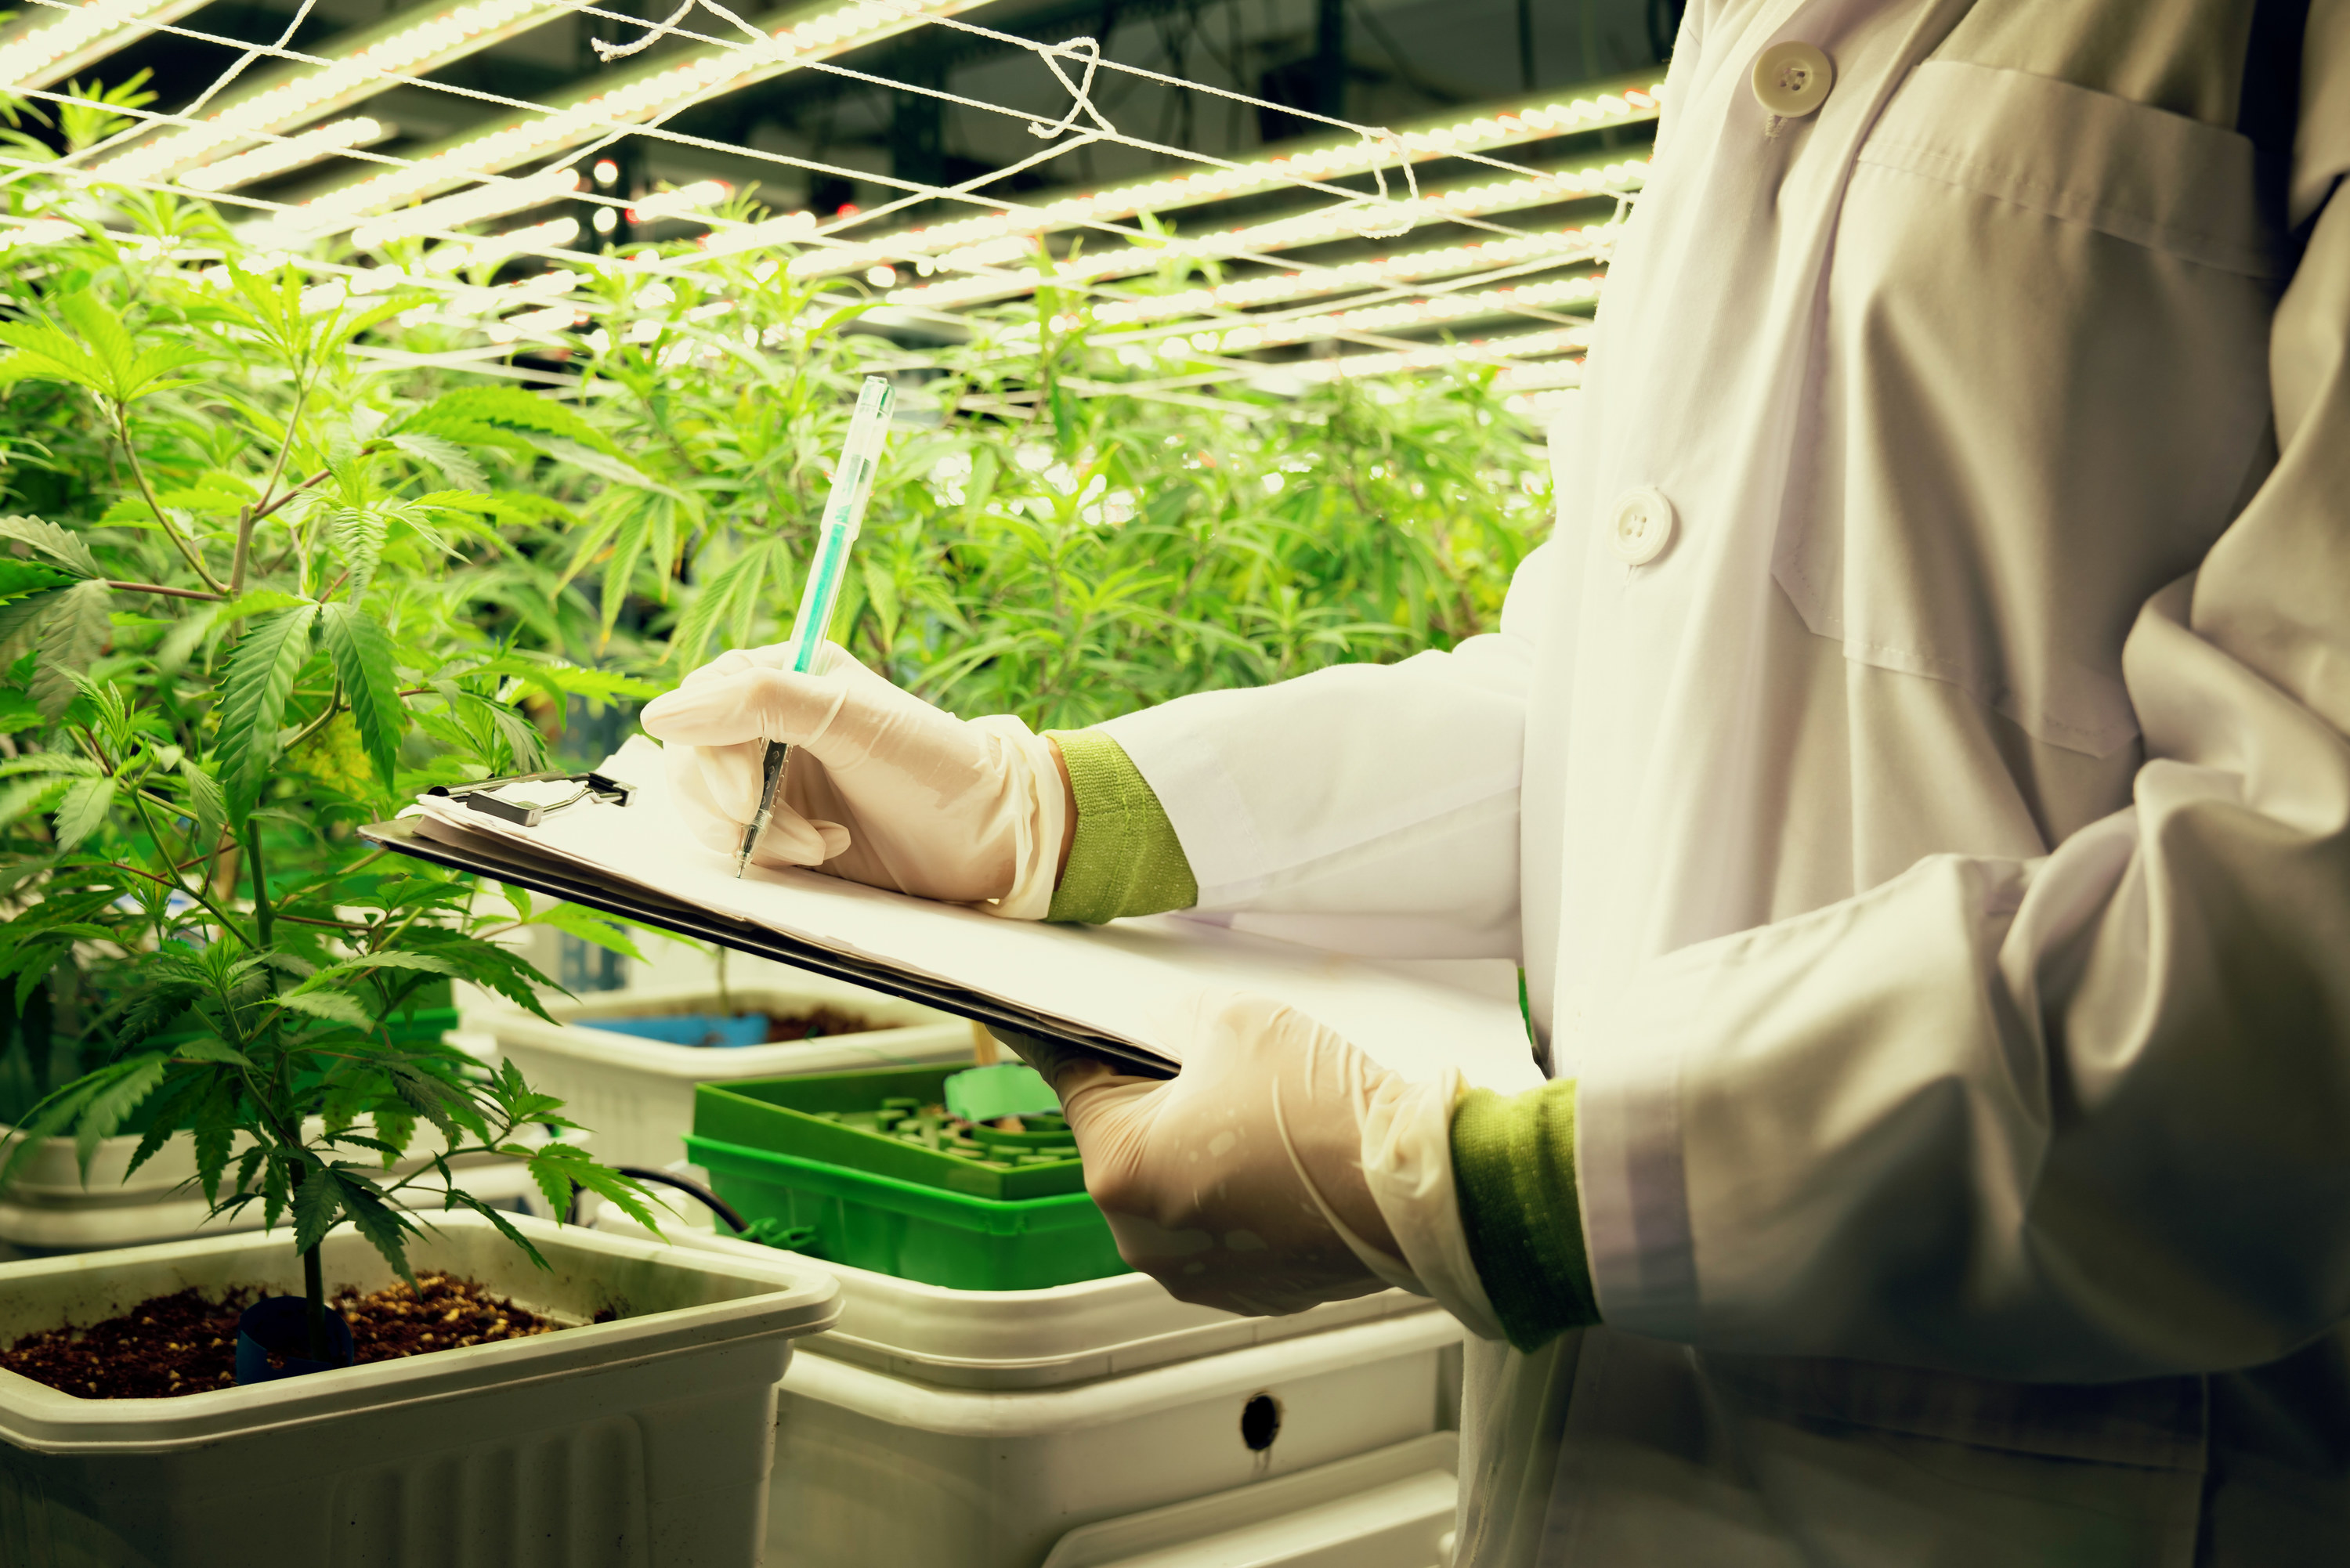 A scientist amid marijuana plants taking notes about cannabis growth